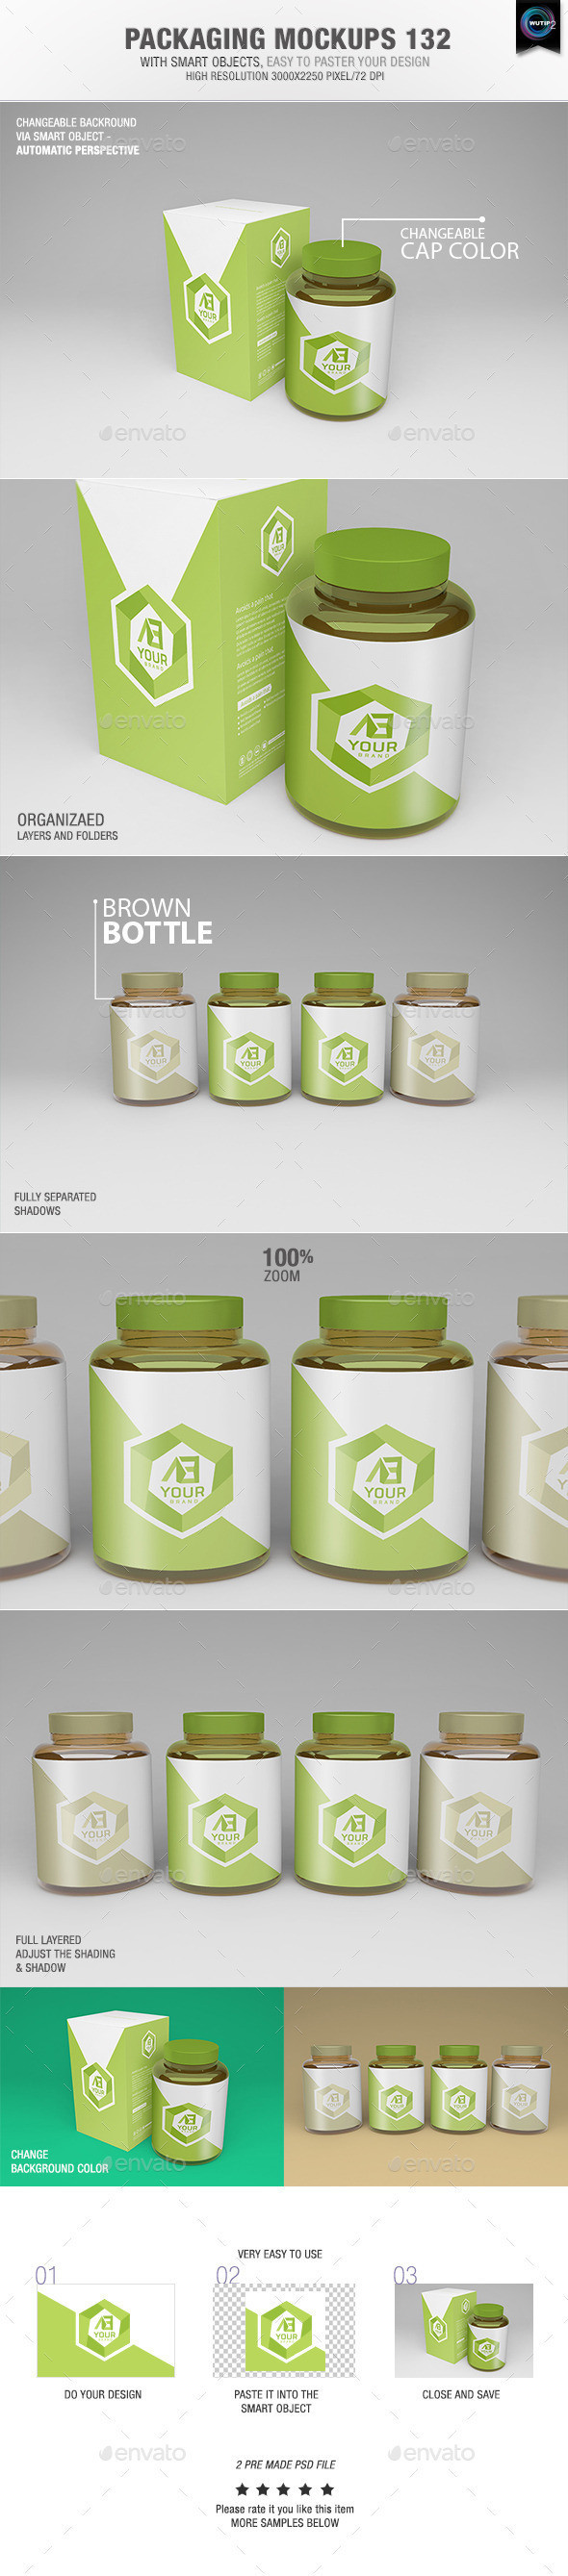 Packaging mockups 132 preview